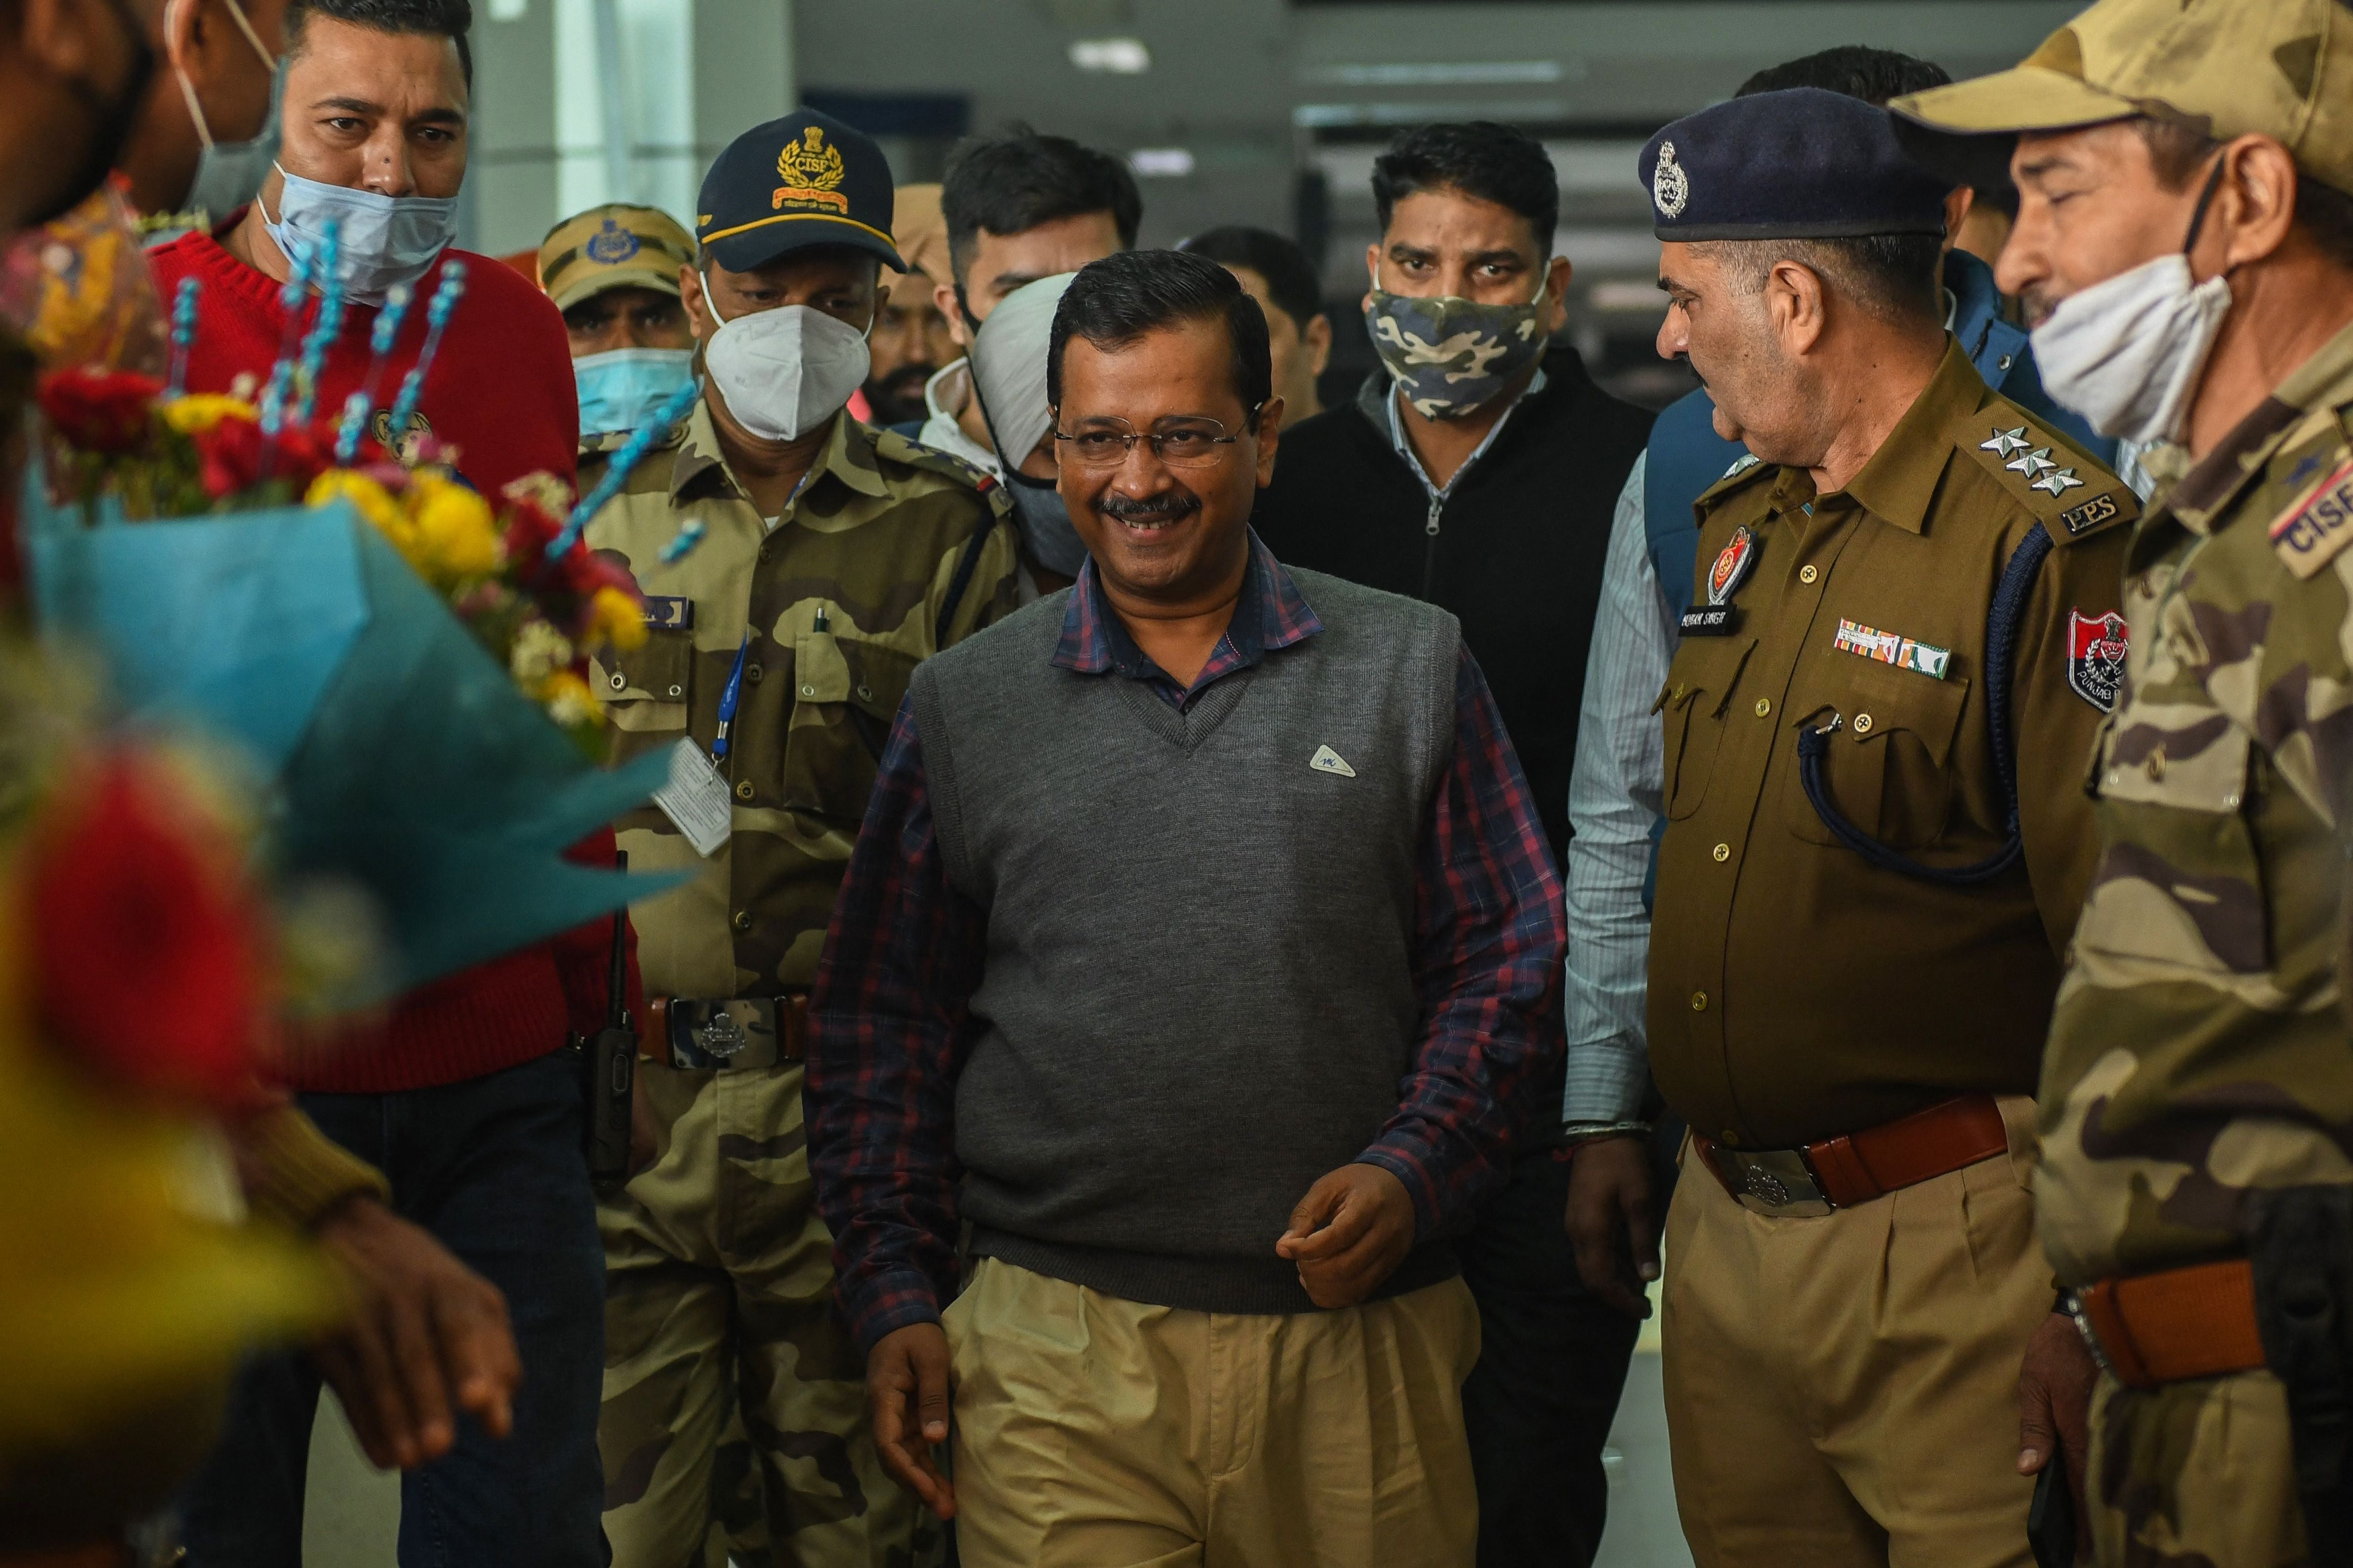 Delhi's chief minister Arvind Kejriwal (centre) is greeted upon his arrival ahead of a political rally in December 2021